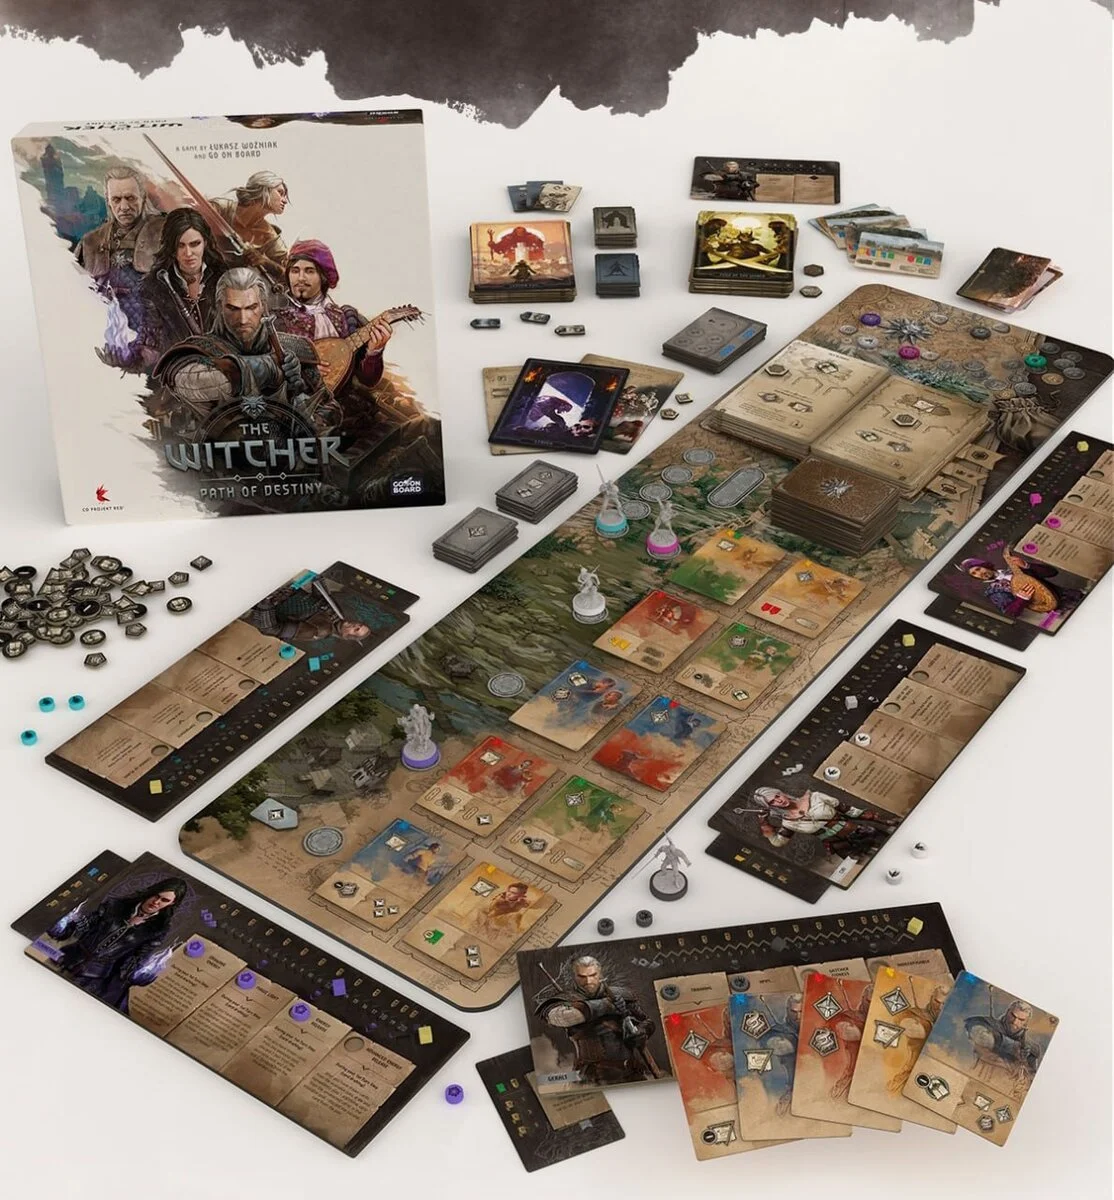 The Witcher board game raised $1.7 million in crowdfunding